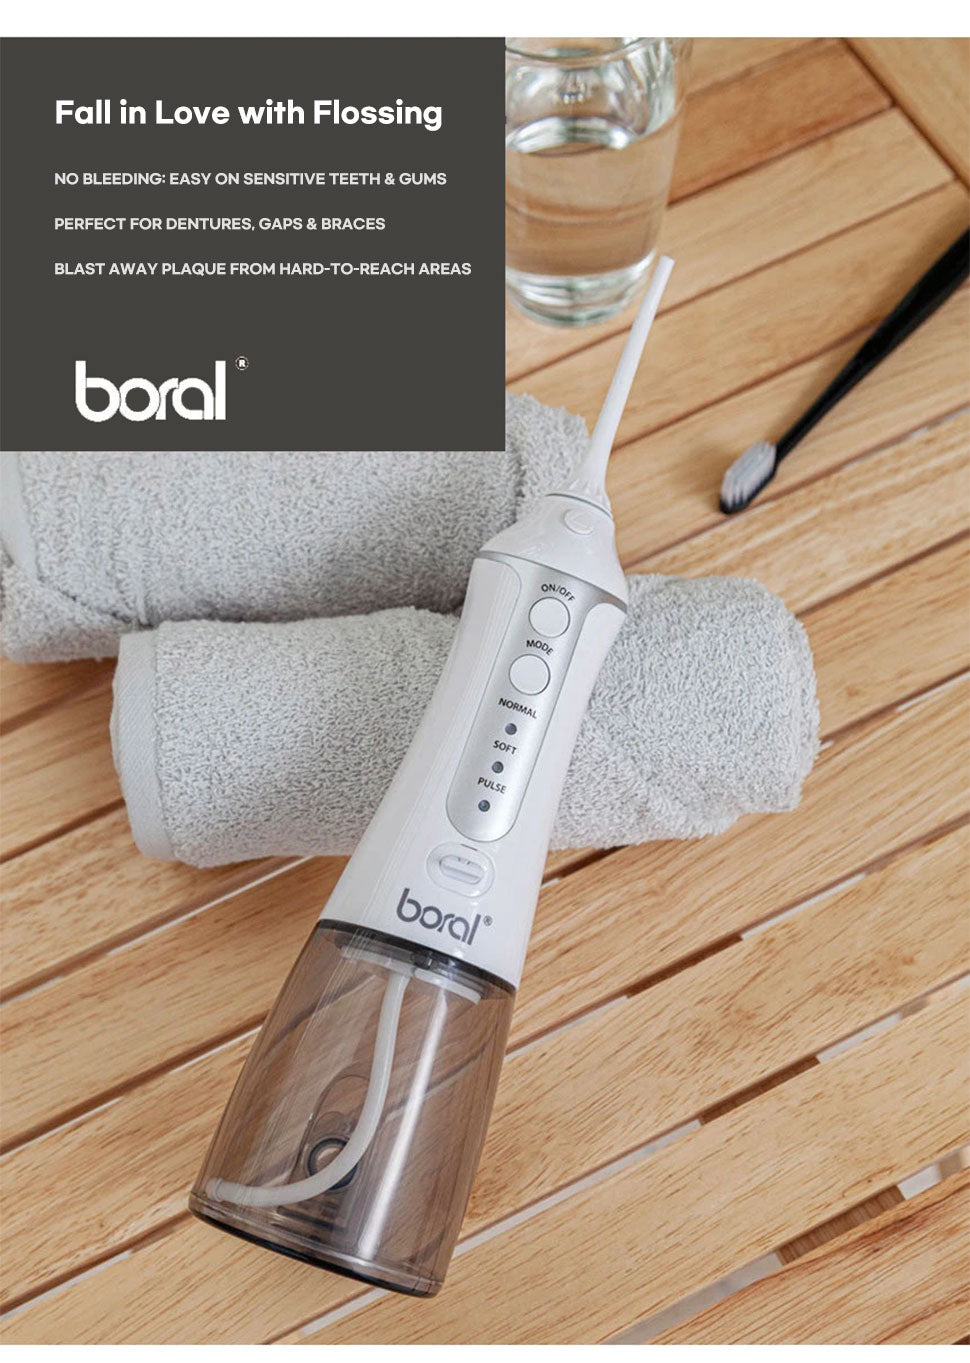 boral tooth cleaner water flossor brush mouth health australia korea shopping